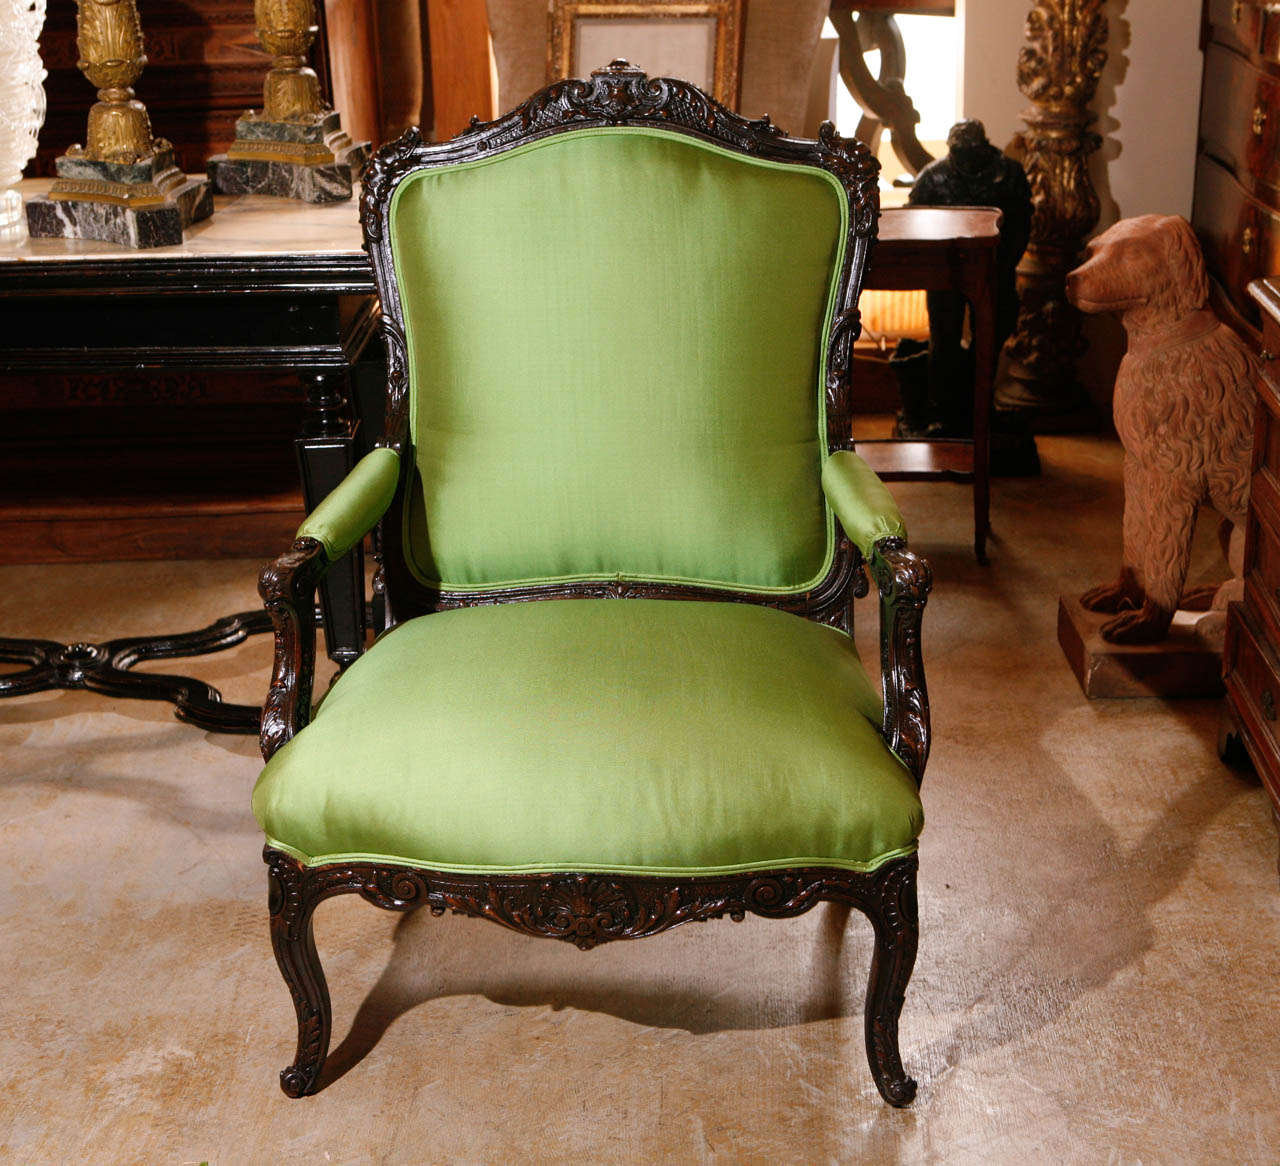 Pair of richly hand-carved armchairs with faces and foliate details. Covered in apple-green, Coraggio fabric.